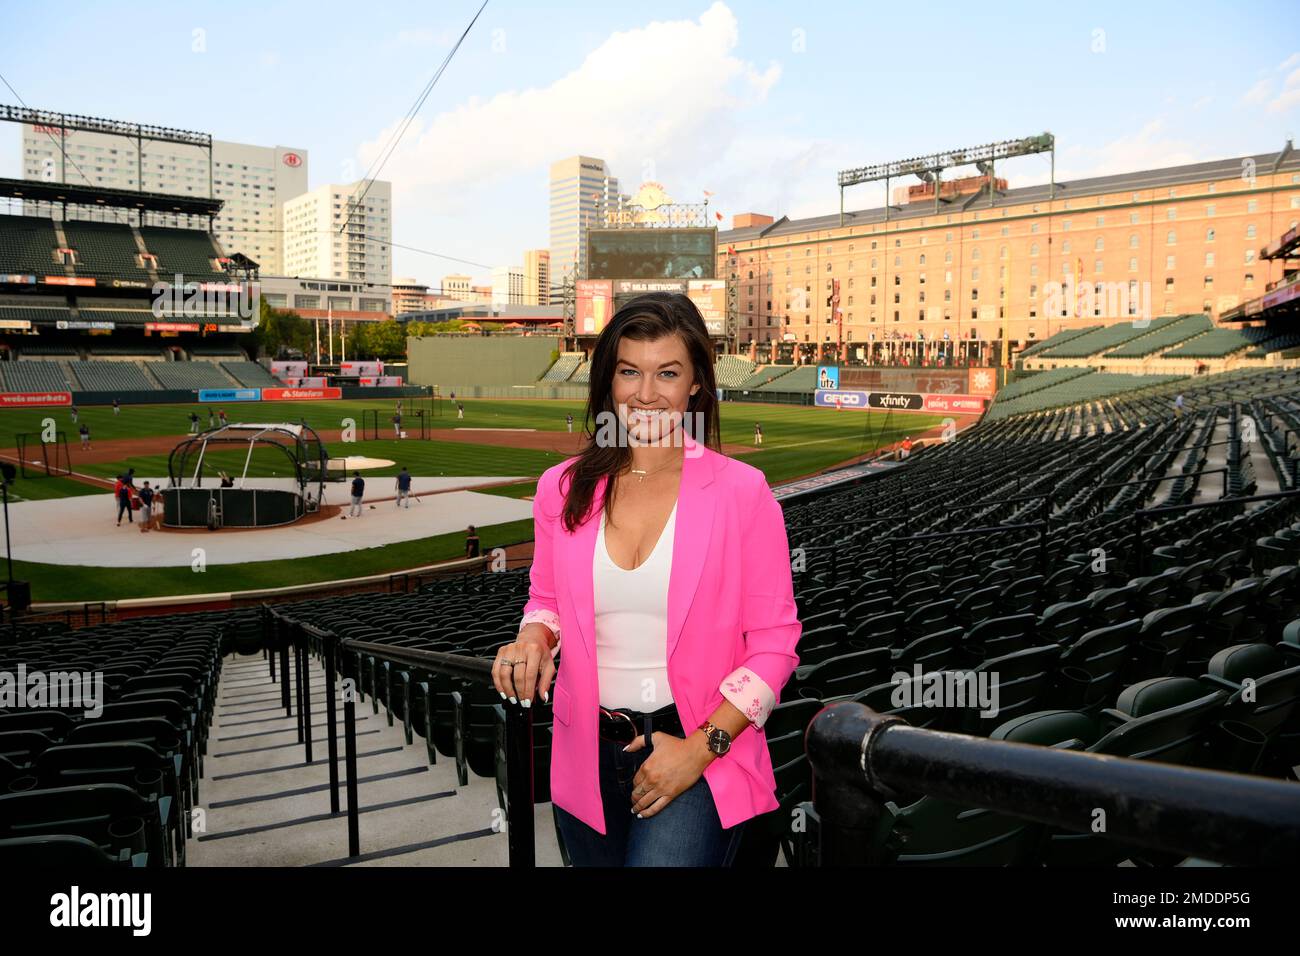 Baltimore Orioles radio and TV announcer Melanie Newman poses for a photograph at Oriole Park at Camden Yards, Tuesday, Sept